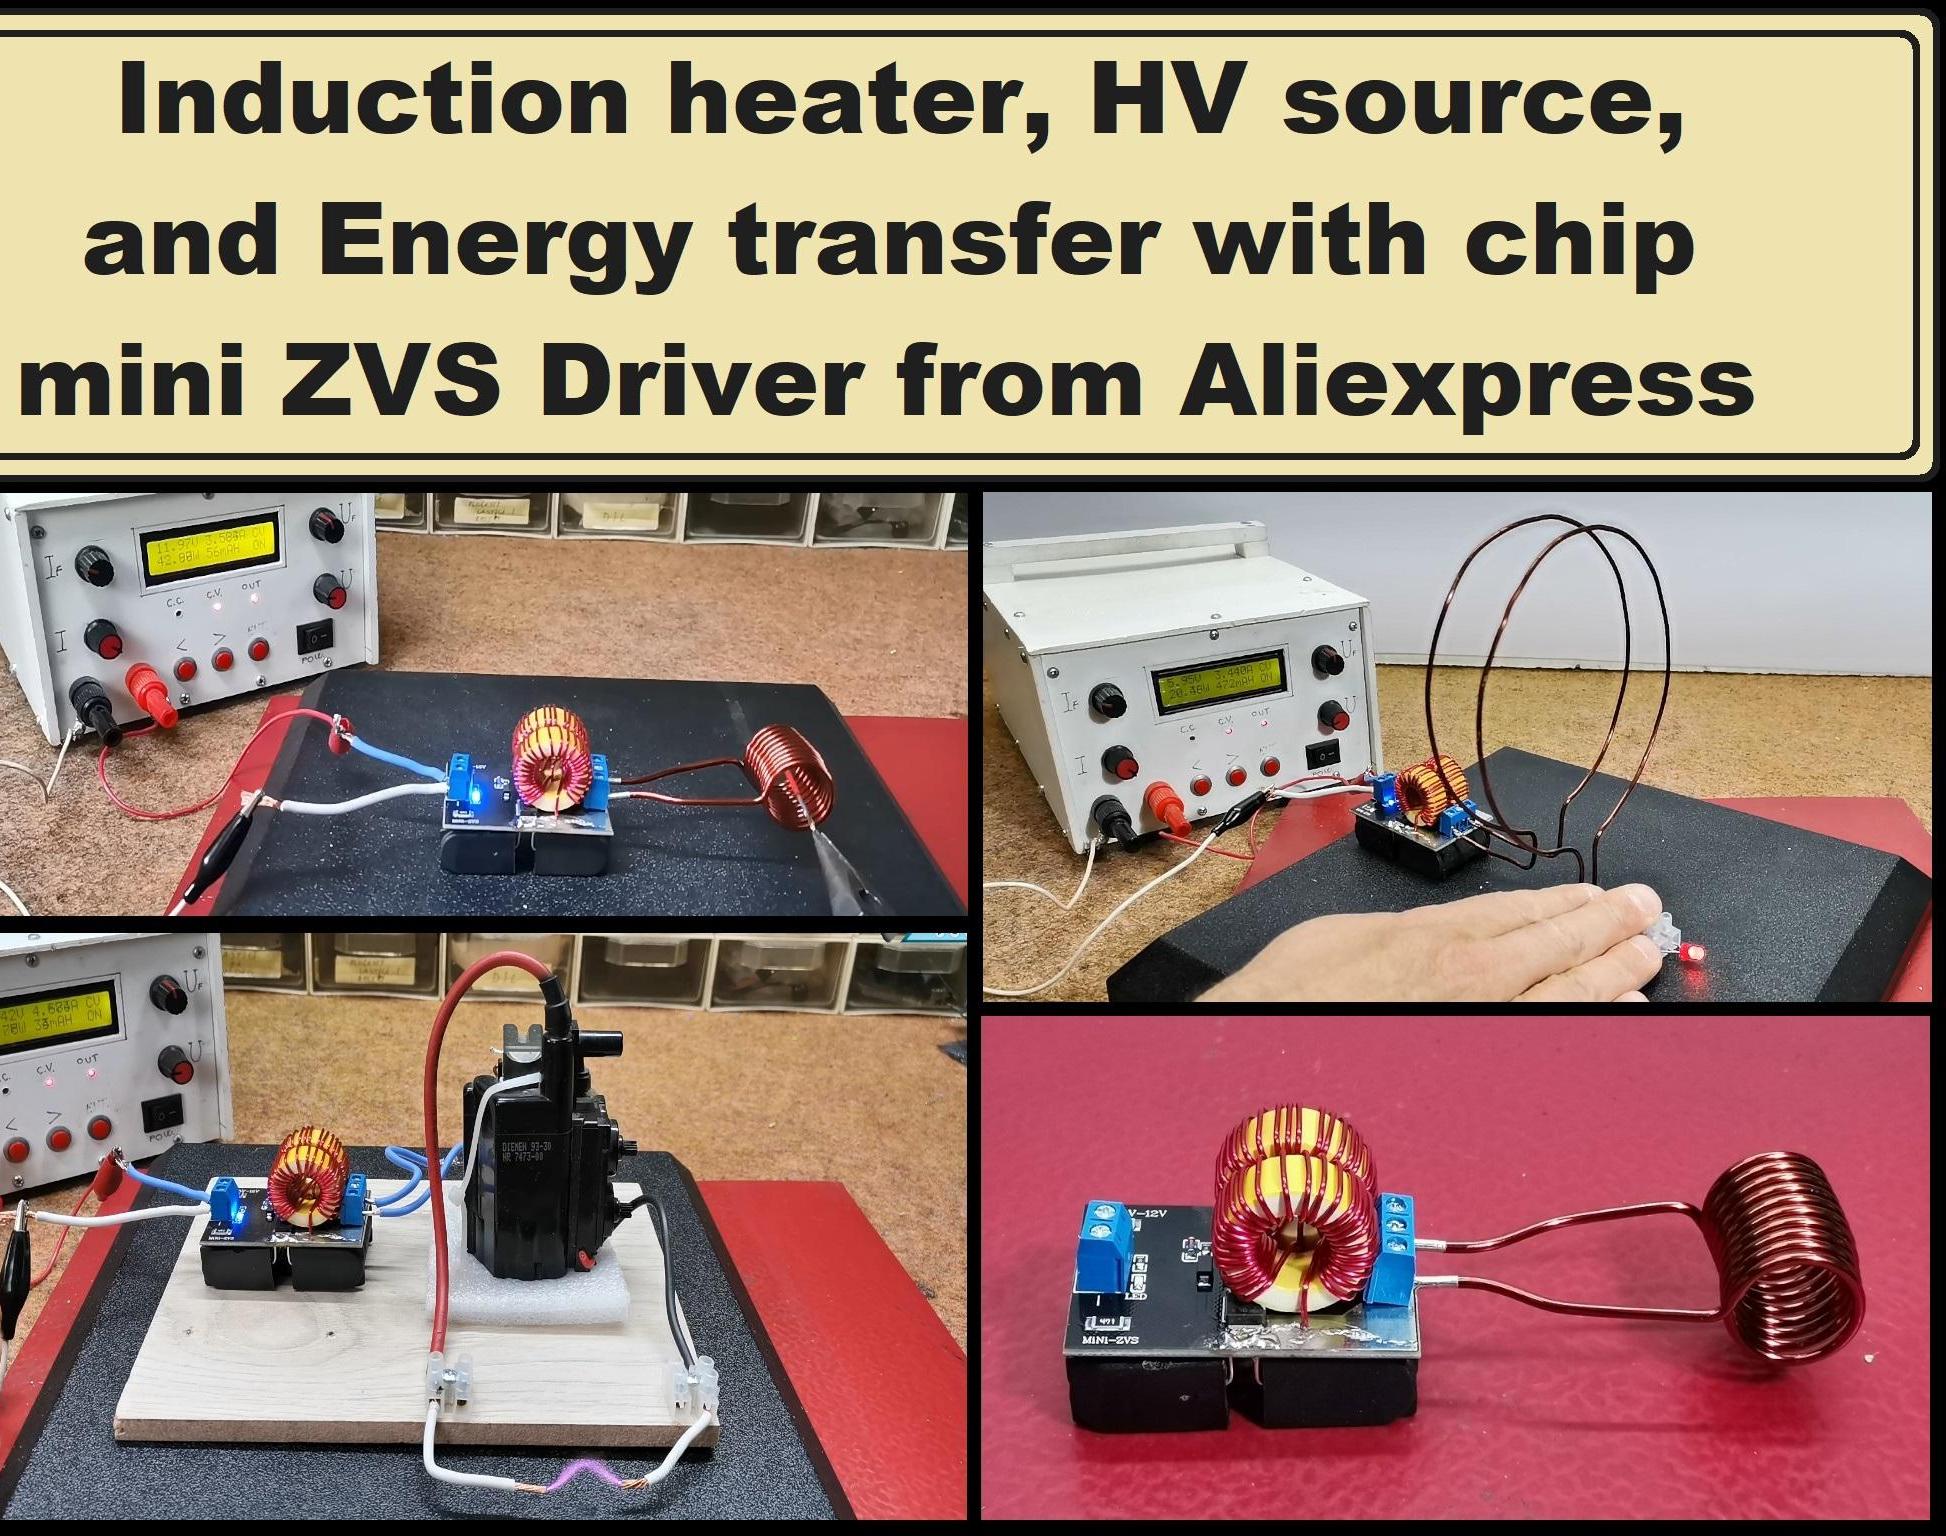 Induction Heater, HV Source, and Wireless Energy Transfer With Chip Mini ZVS Driver From Aliexpress